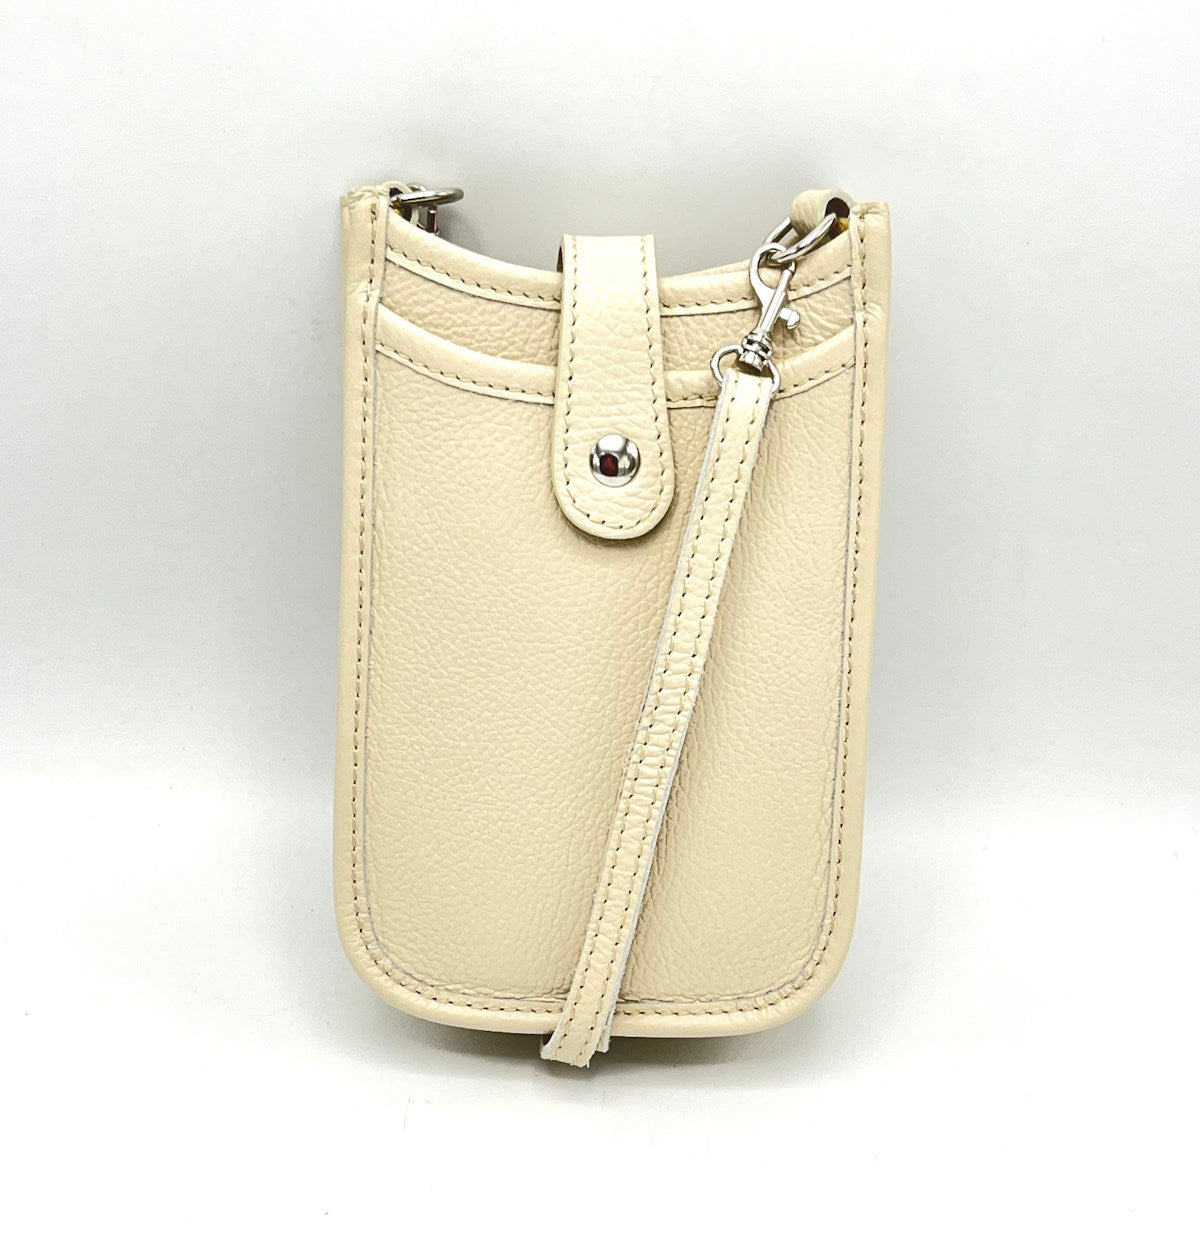 Genuine leather mini shoulder bag, Made in Italy, art. 112450